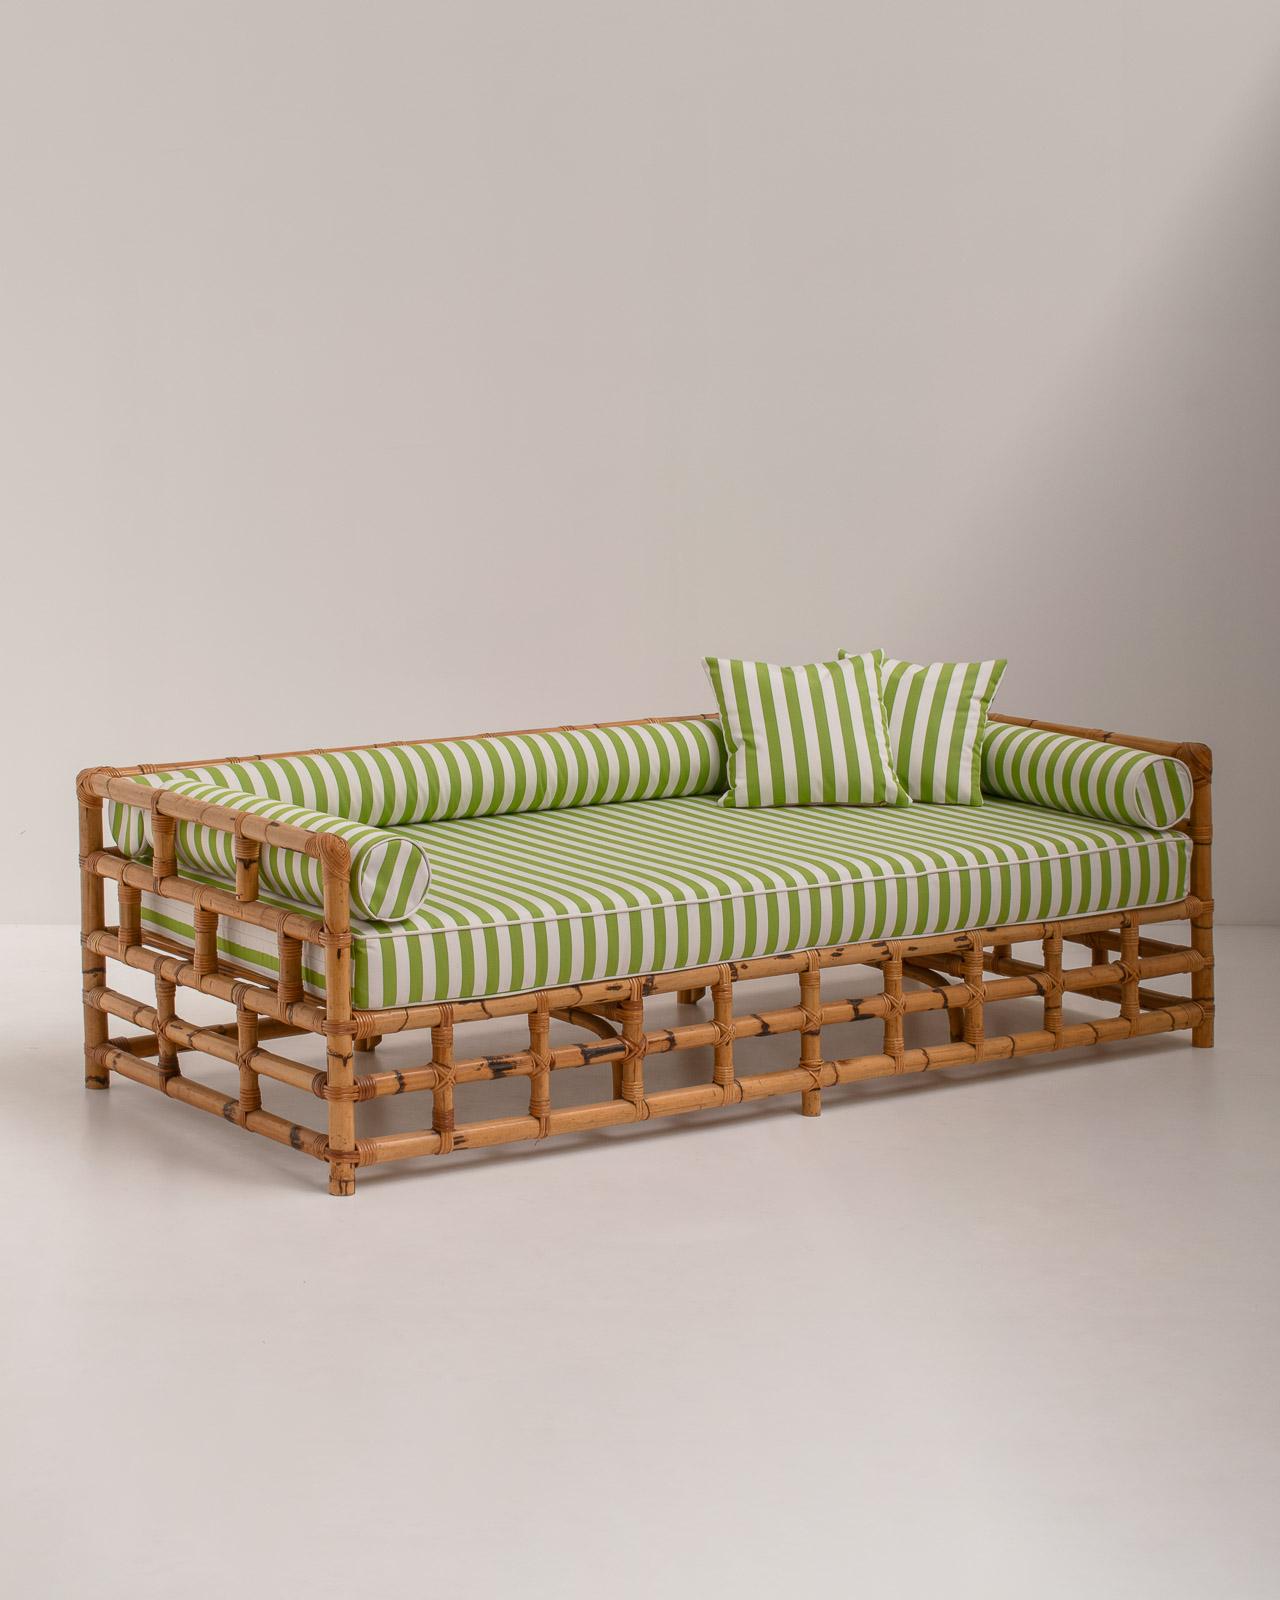 Fabric Striped Italian Bamboo Sofa or Daybed, Italy, 1970s